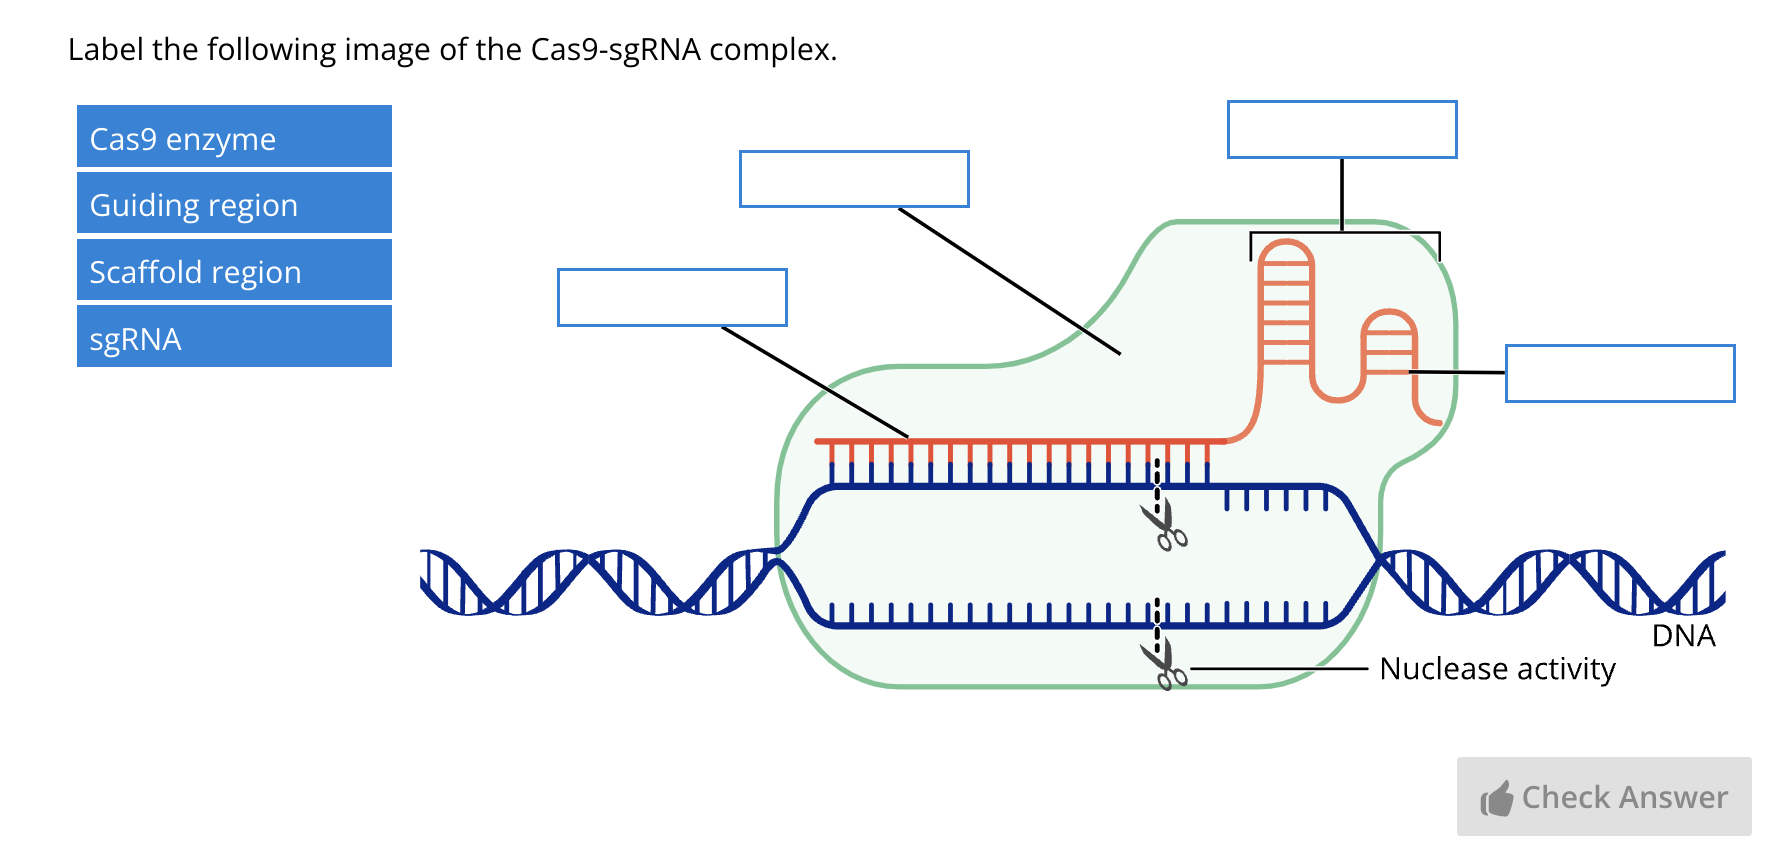 A "Label Image" question on the Challenge page requires students to label the components of the Cas9-sgRNA complex.